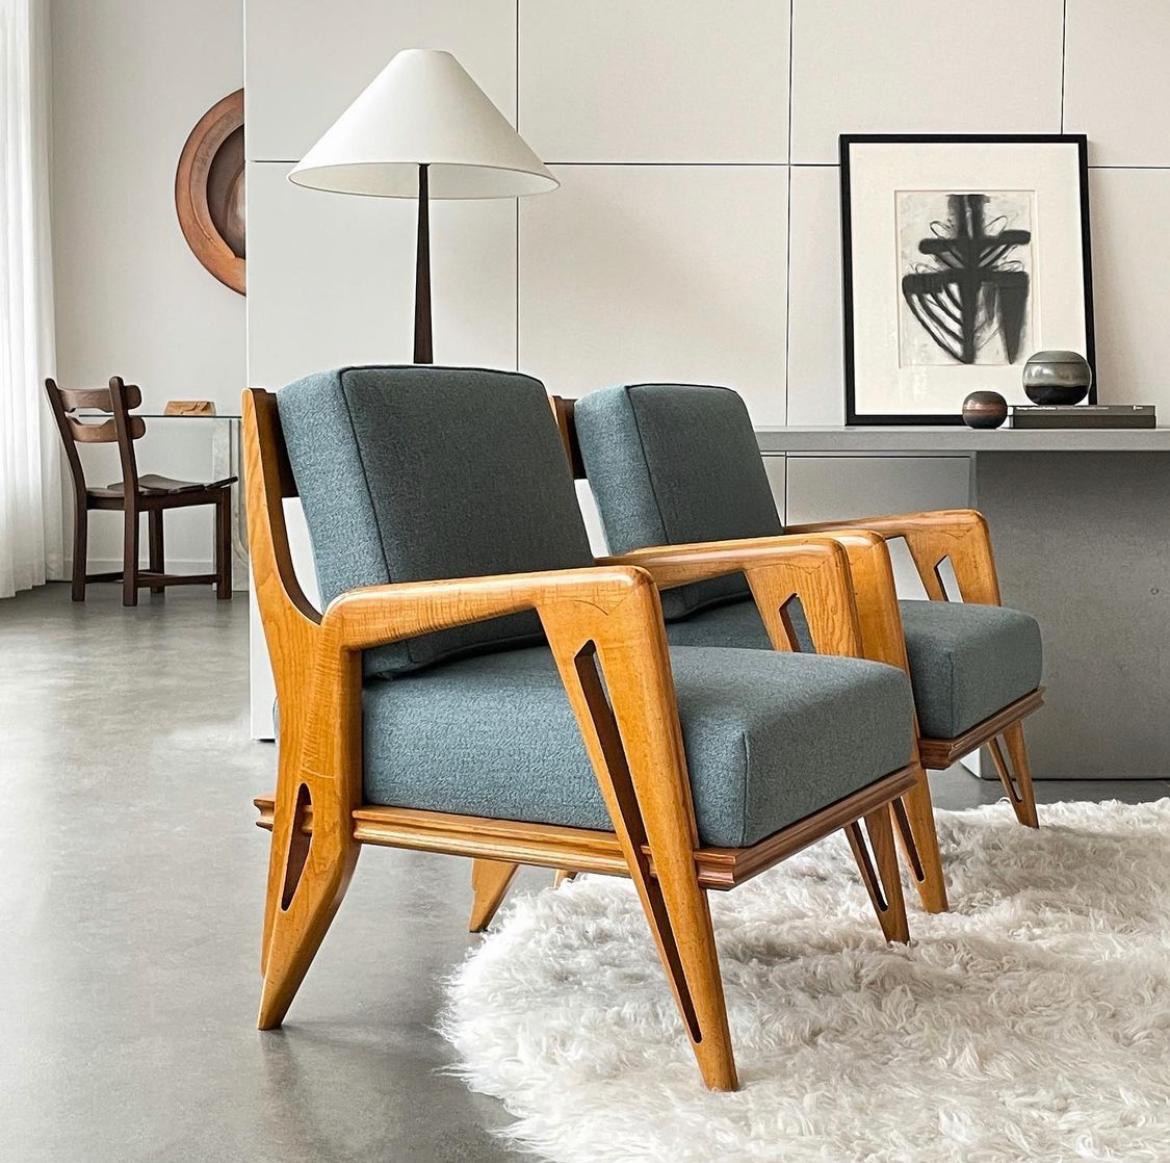 A pair of stunning Italian lounge chairs, by the renowned designers Franco Campo and Carlo Graffi (1925-1985), two of Italy's most celebrated furniture designers from the mid-20th century. These exquisite lounge chairs, dating back to the 1950s, are